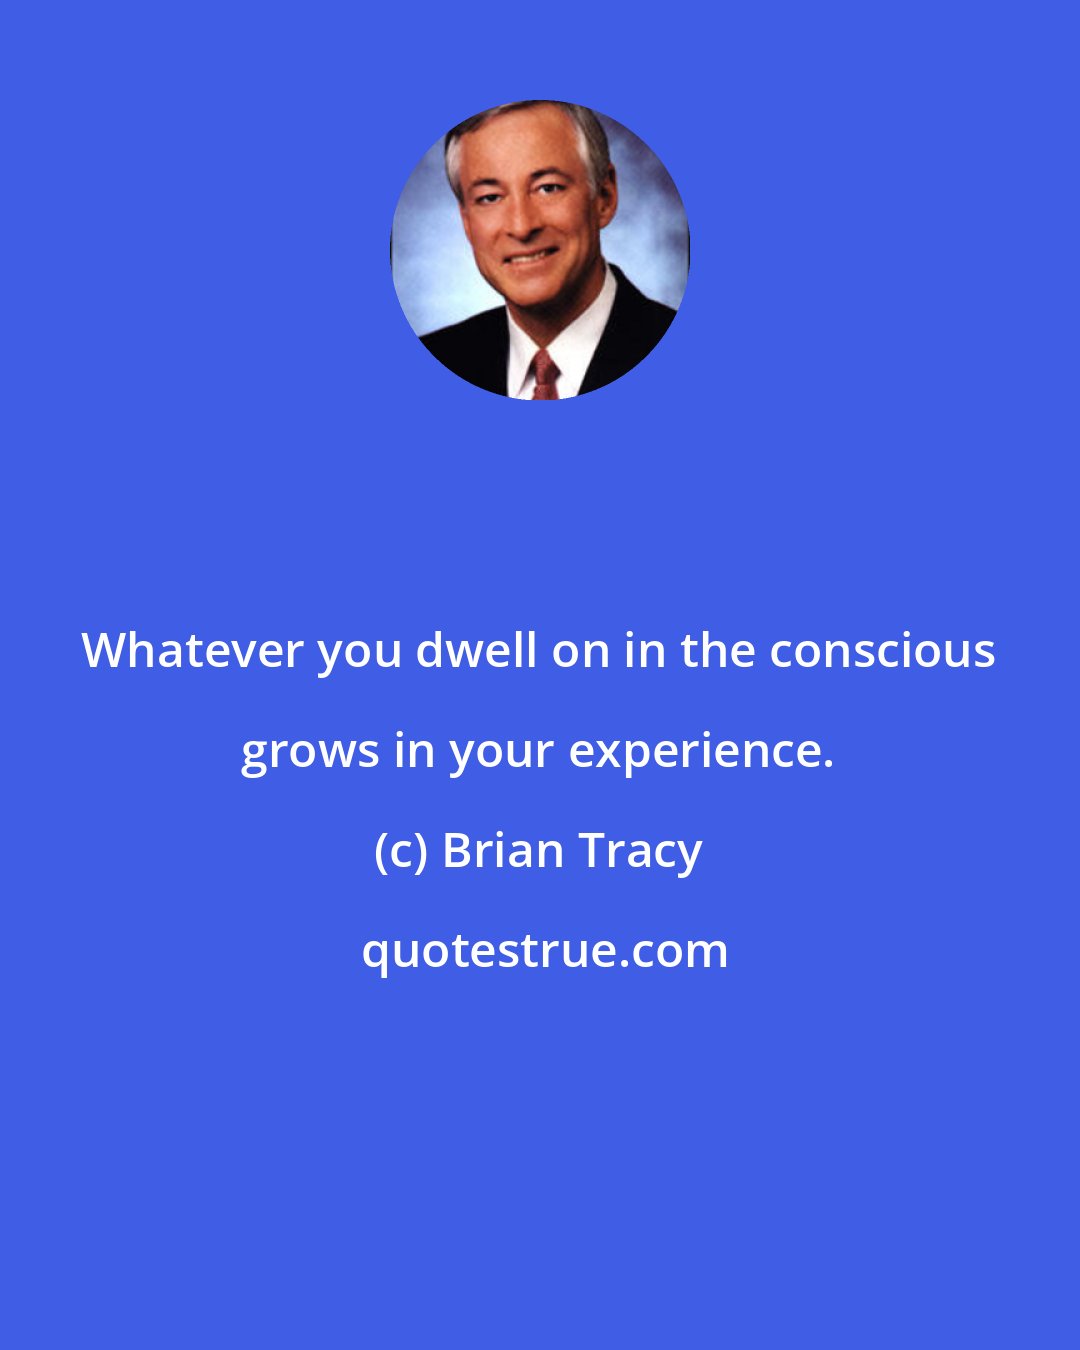 Brian Tracy: Whatever you dwell on in the conscious grows in your experience.